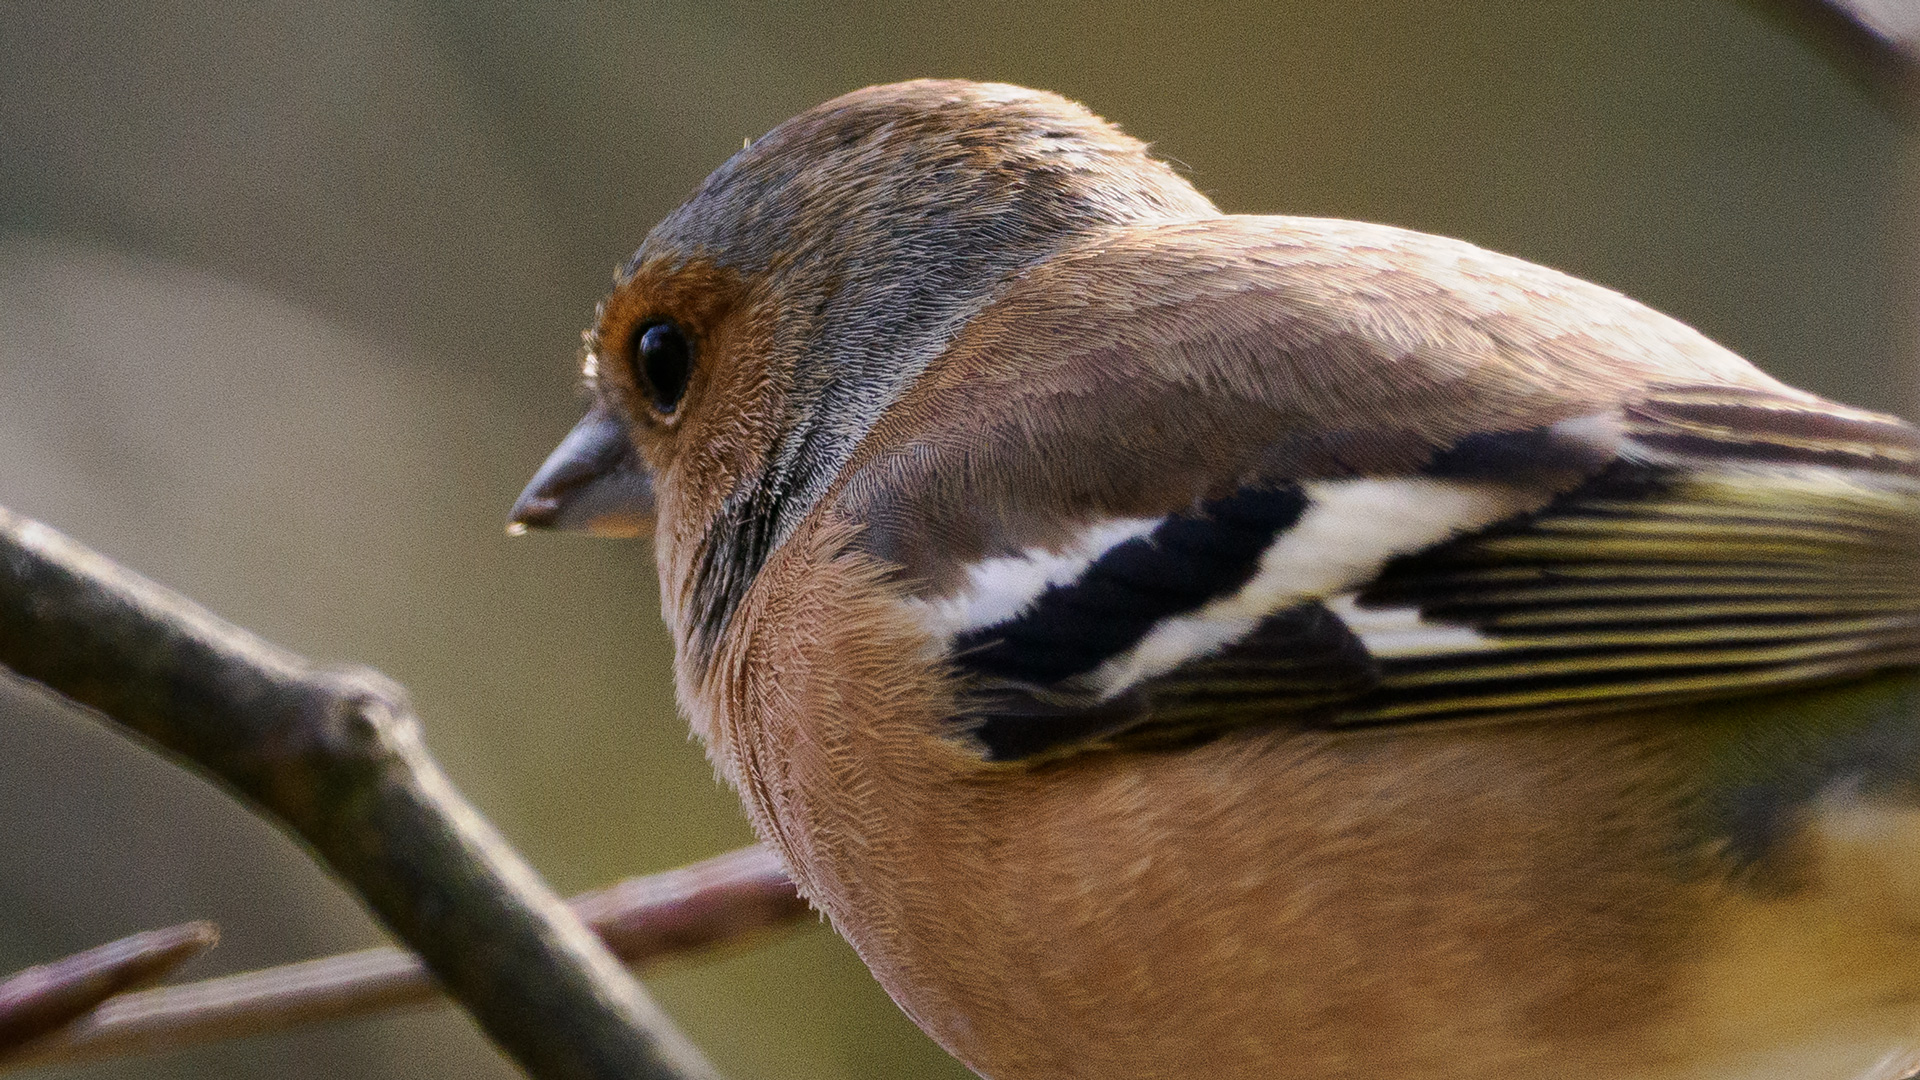 enlargement of the previous image, showing the eye of the bird being slightly soft